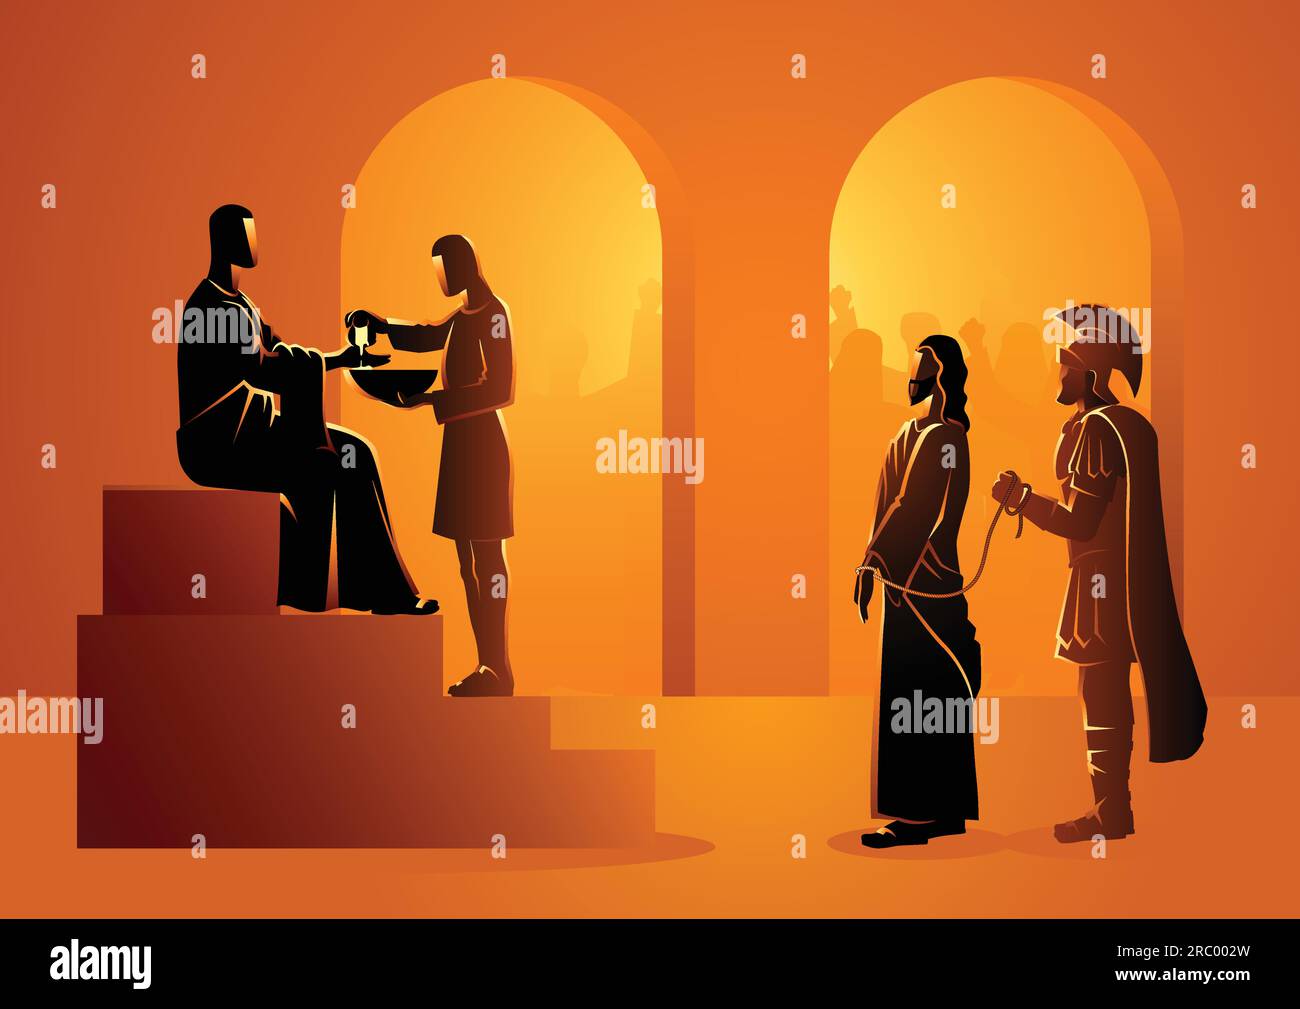 Biblical vector illustration series. Way of the Cross or Stations of the Cross, Pilate condemns Jesus to die. Stock Vector